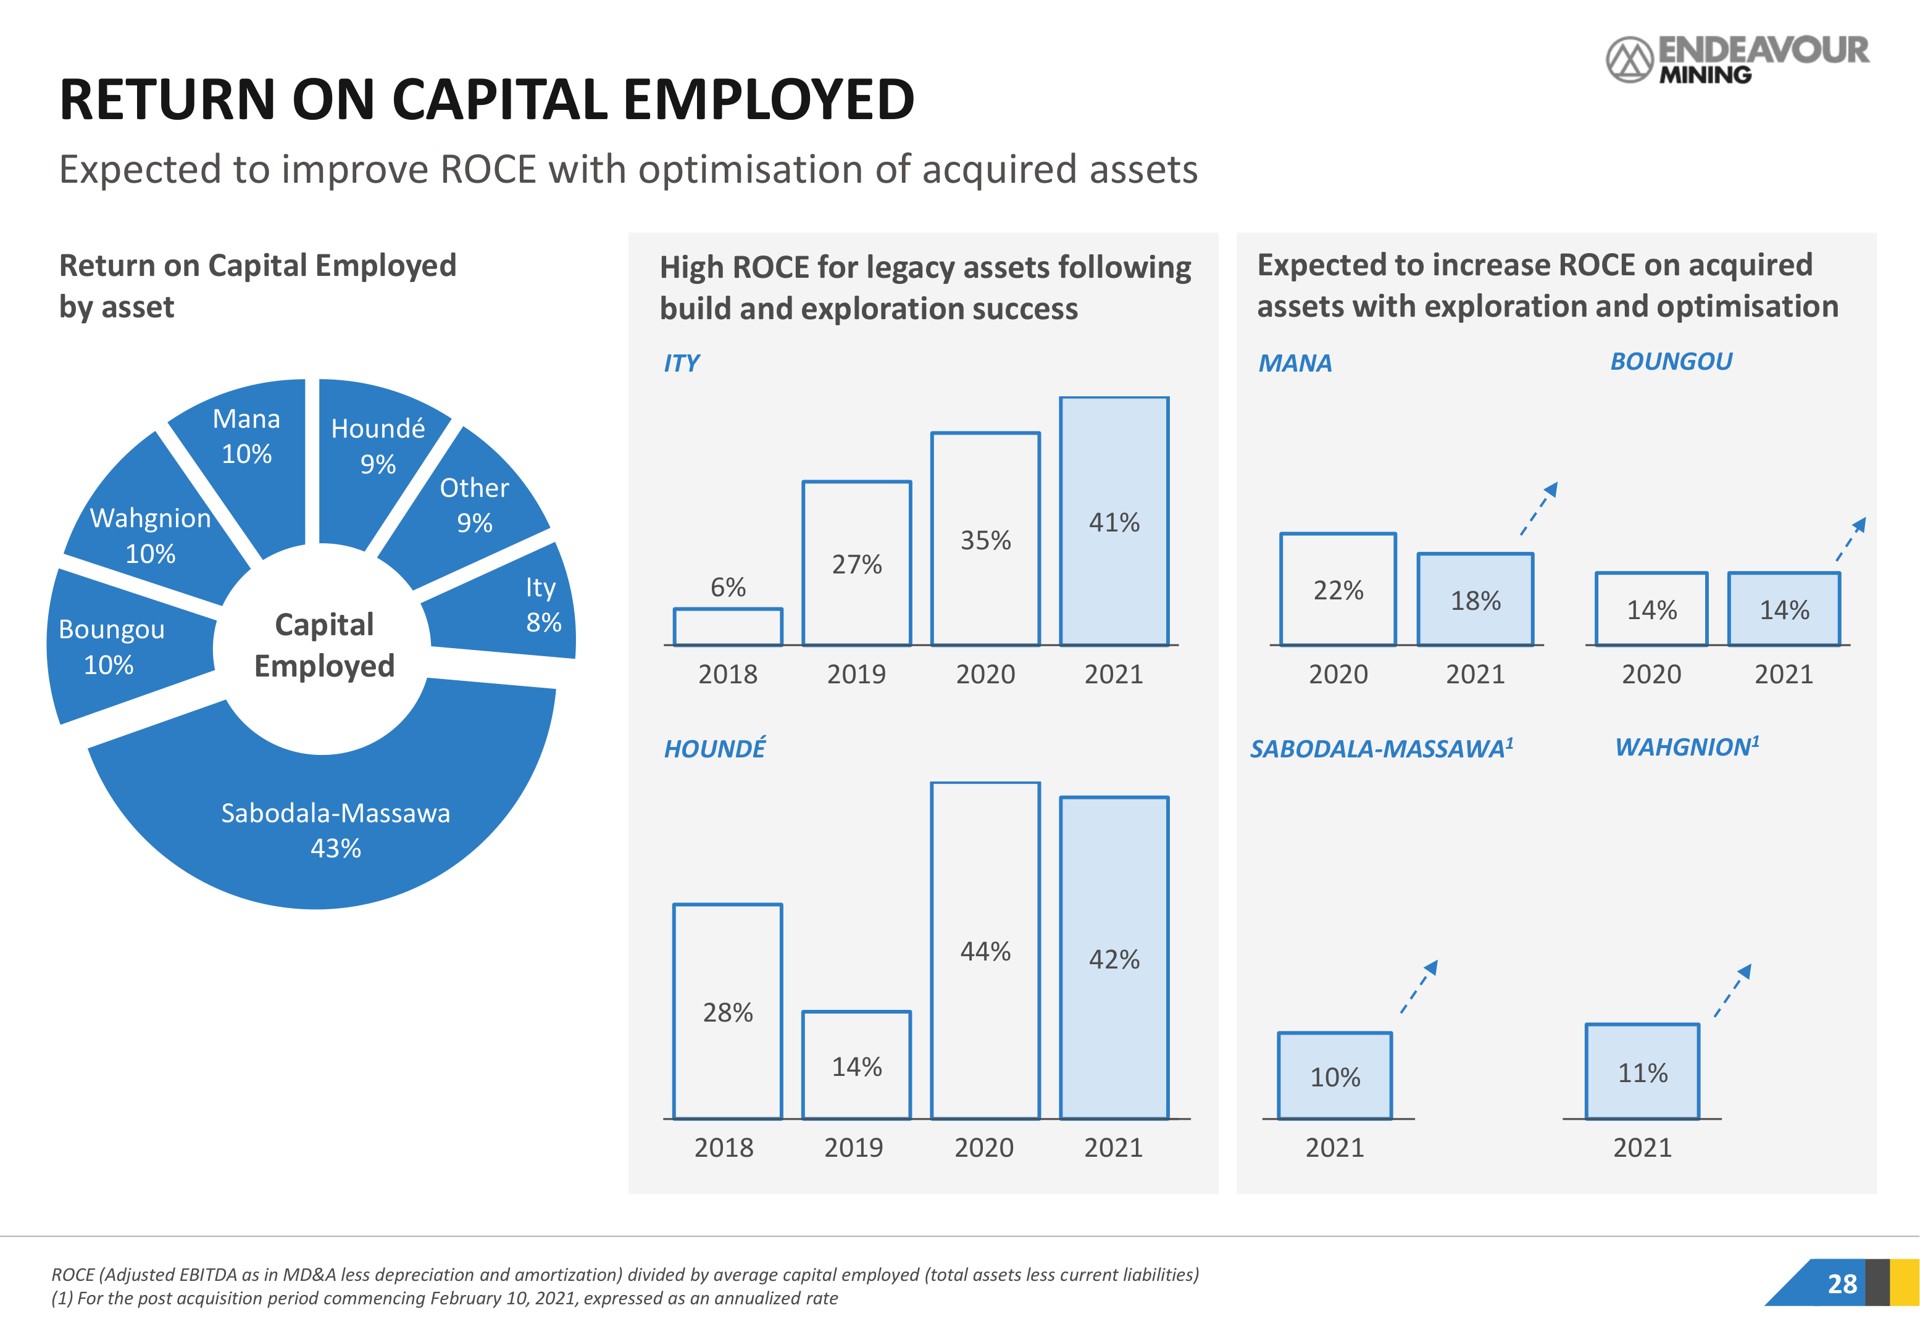 return on capital employed expected to improve with of acquired assets | Endeavour Mining